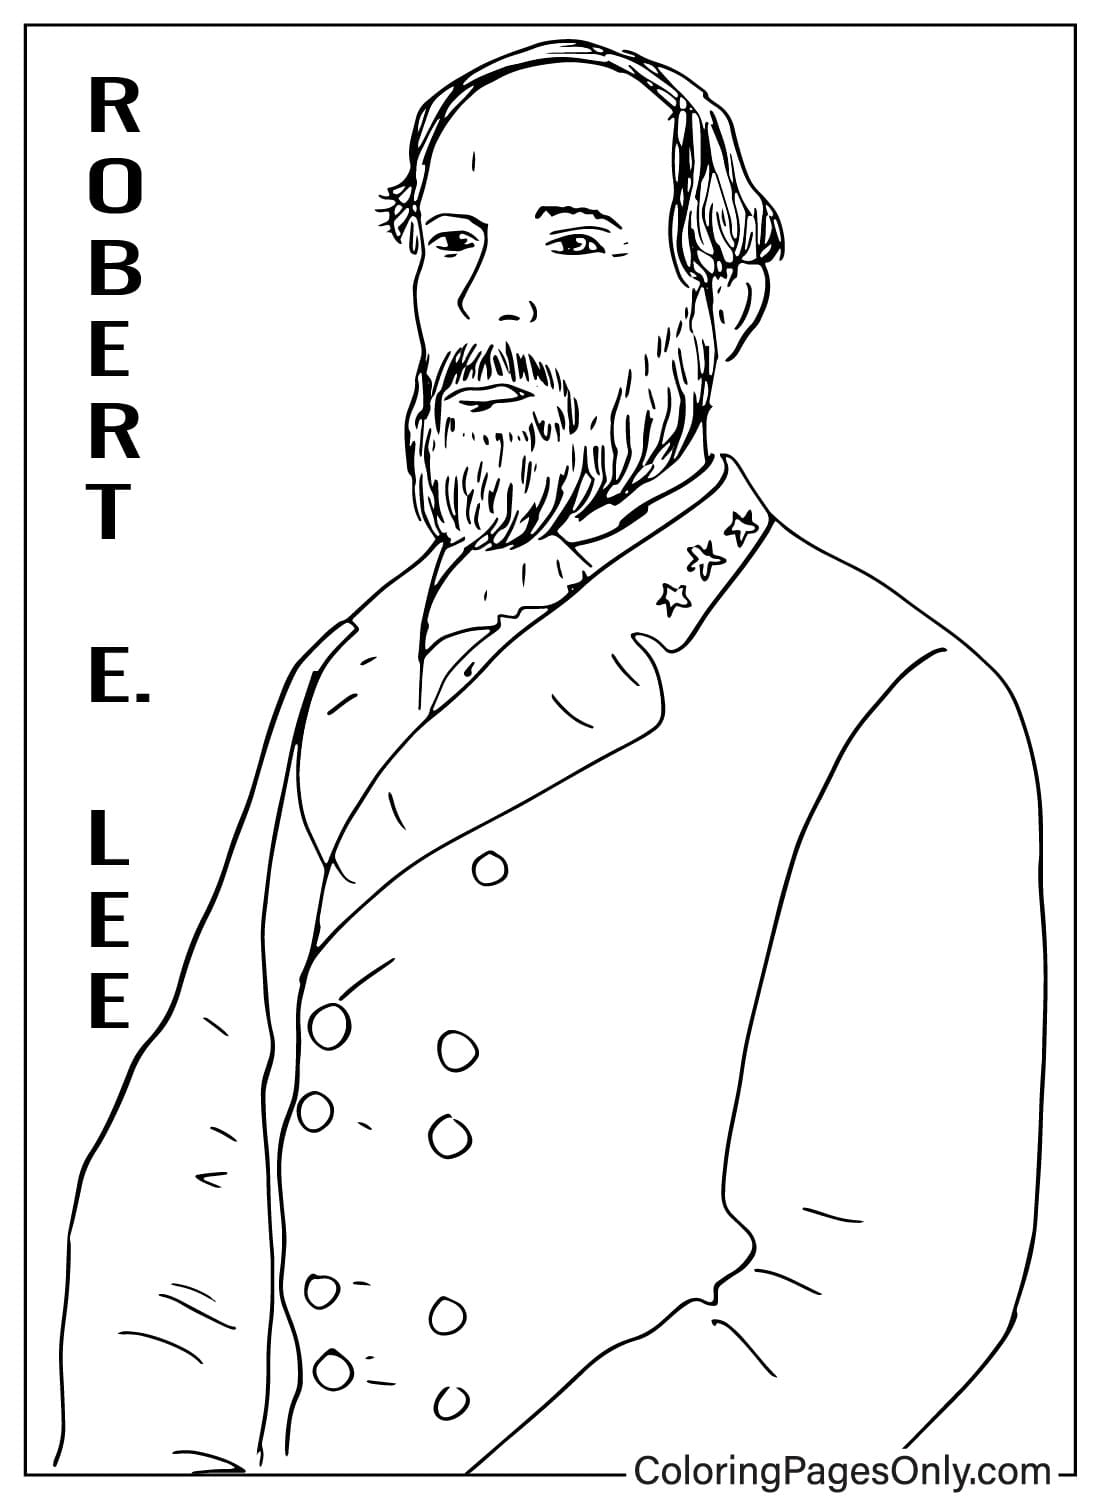 Robert e lee drawing coloring page